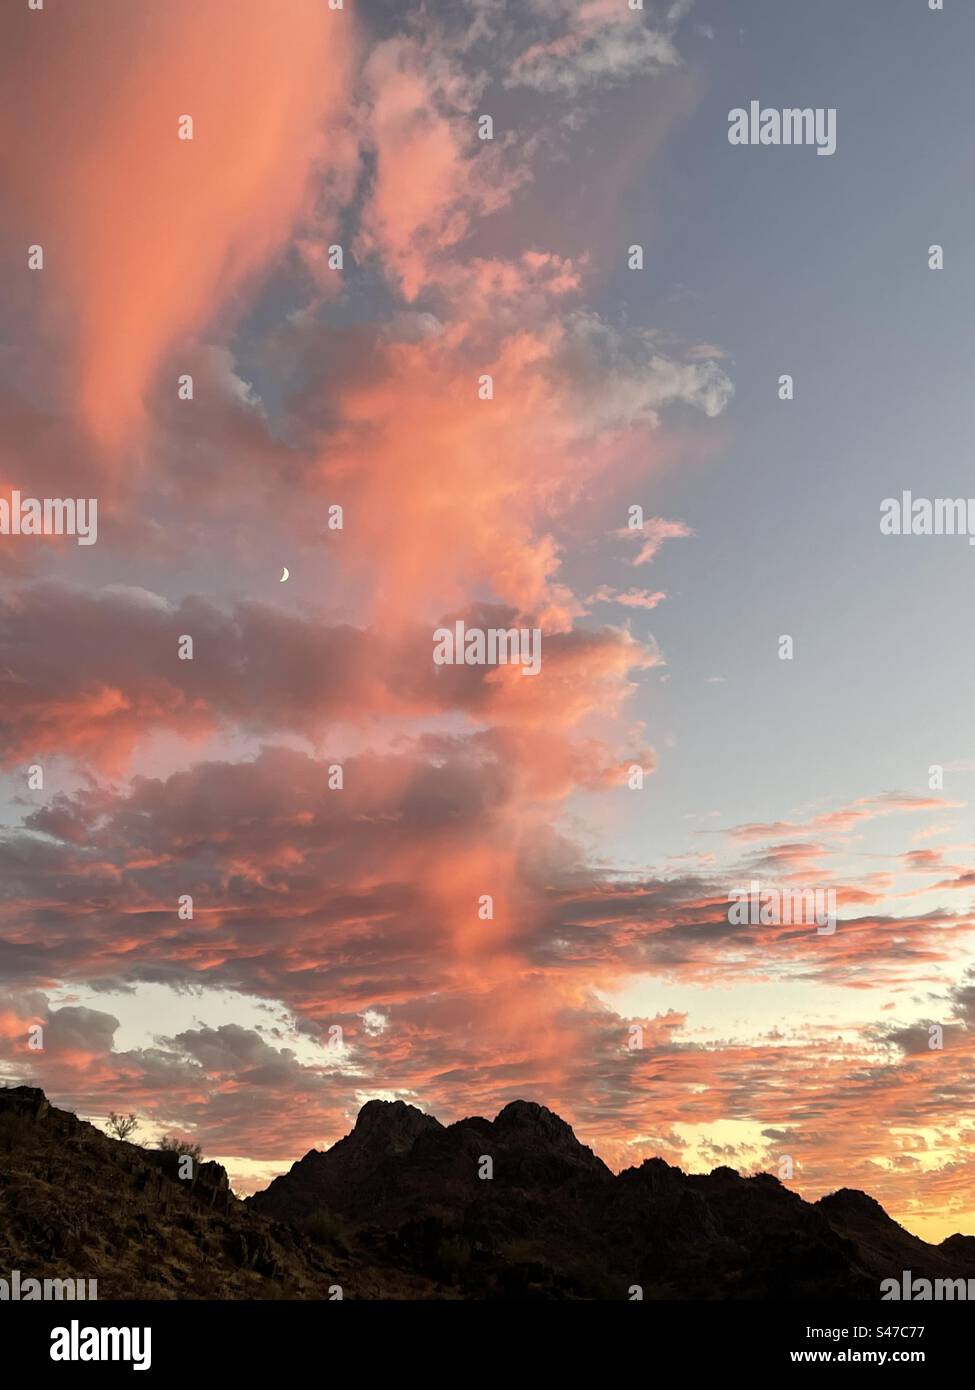 Crescent Moon embedded in fluffy rose orange clouds of Arizona sunset over Piestewa Peak, Phoenix Mountains Preserve, twilight blue and glowing gold sky Stock Photo